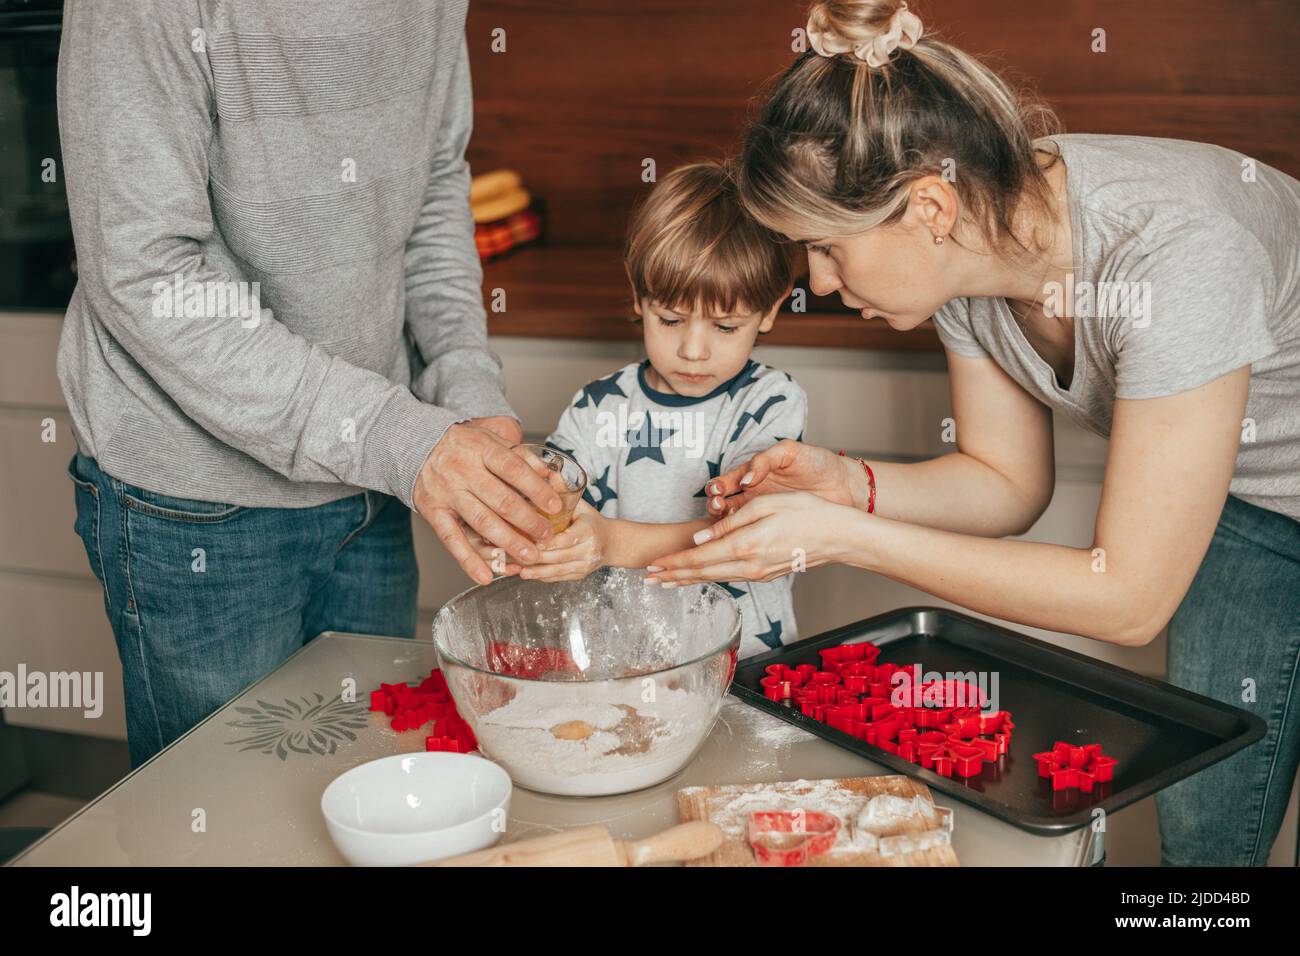 Baking process of young family, people have fun in kitchen at home. Father, mother and child cooking together, little boy 4-5 years old, Stock Photo